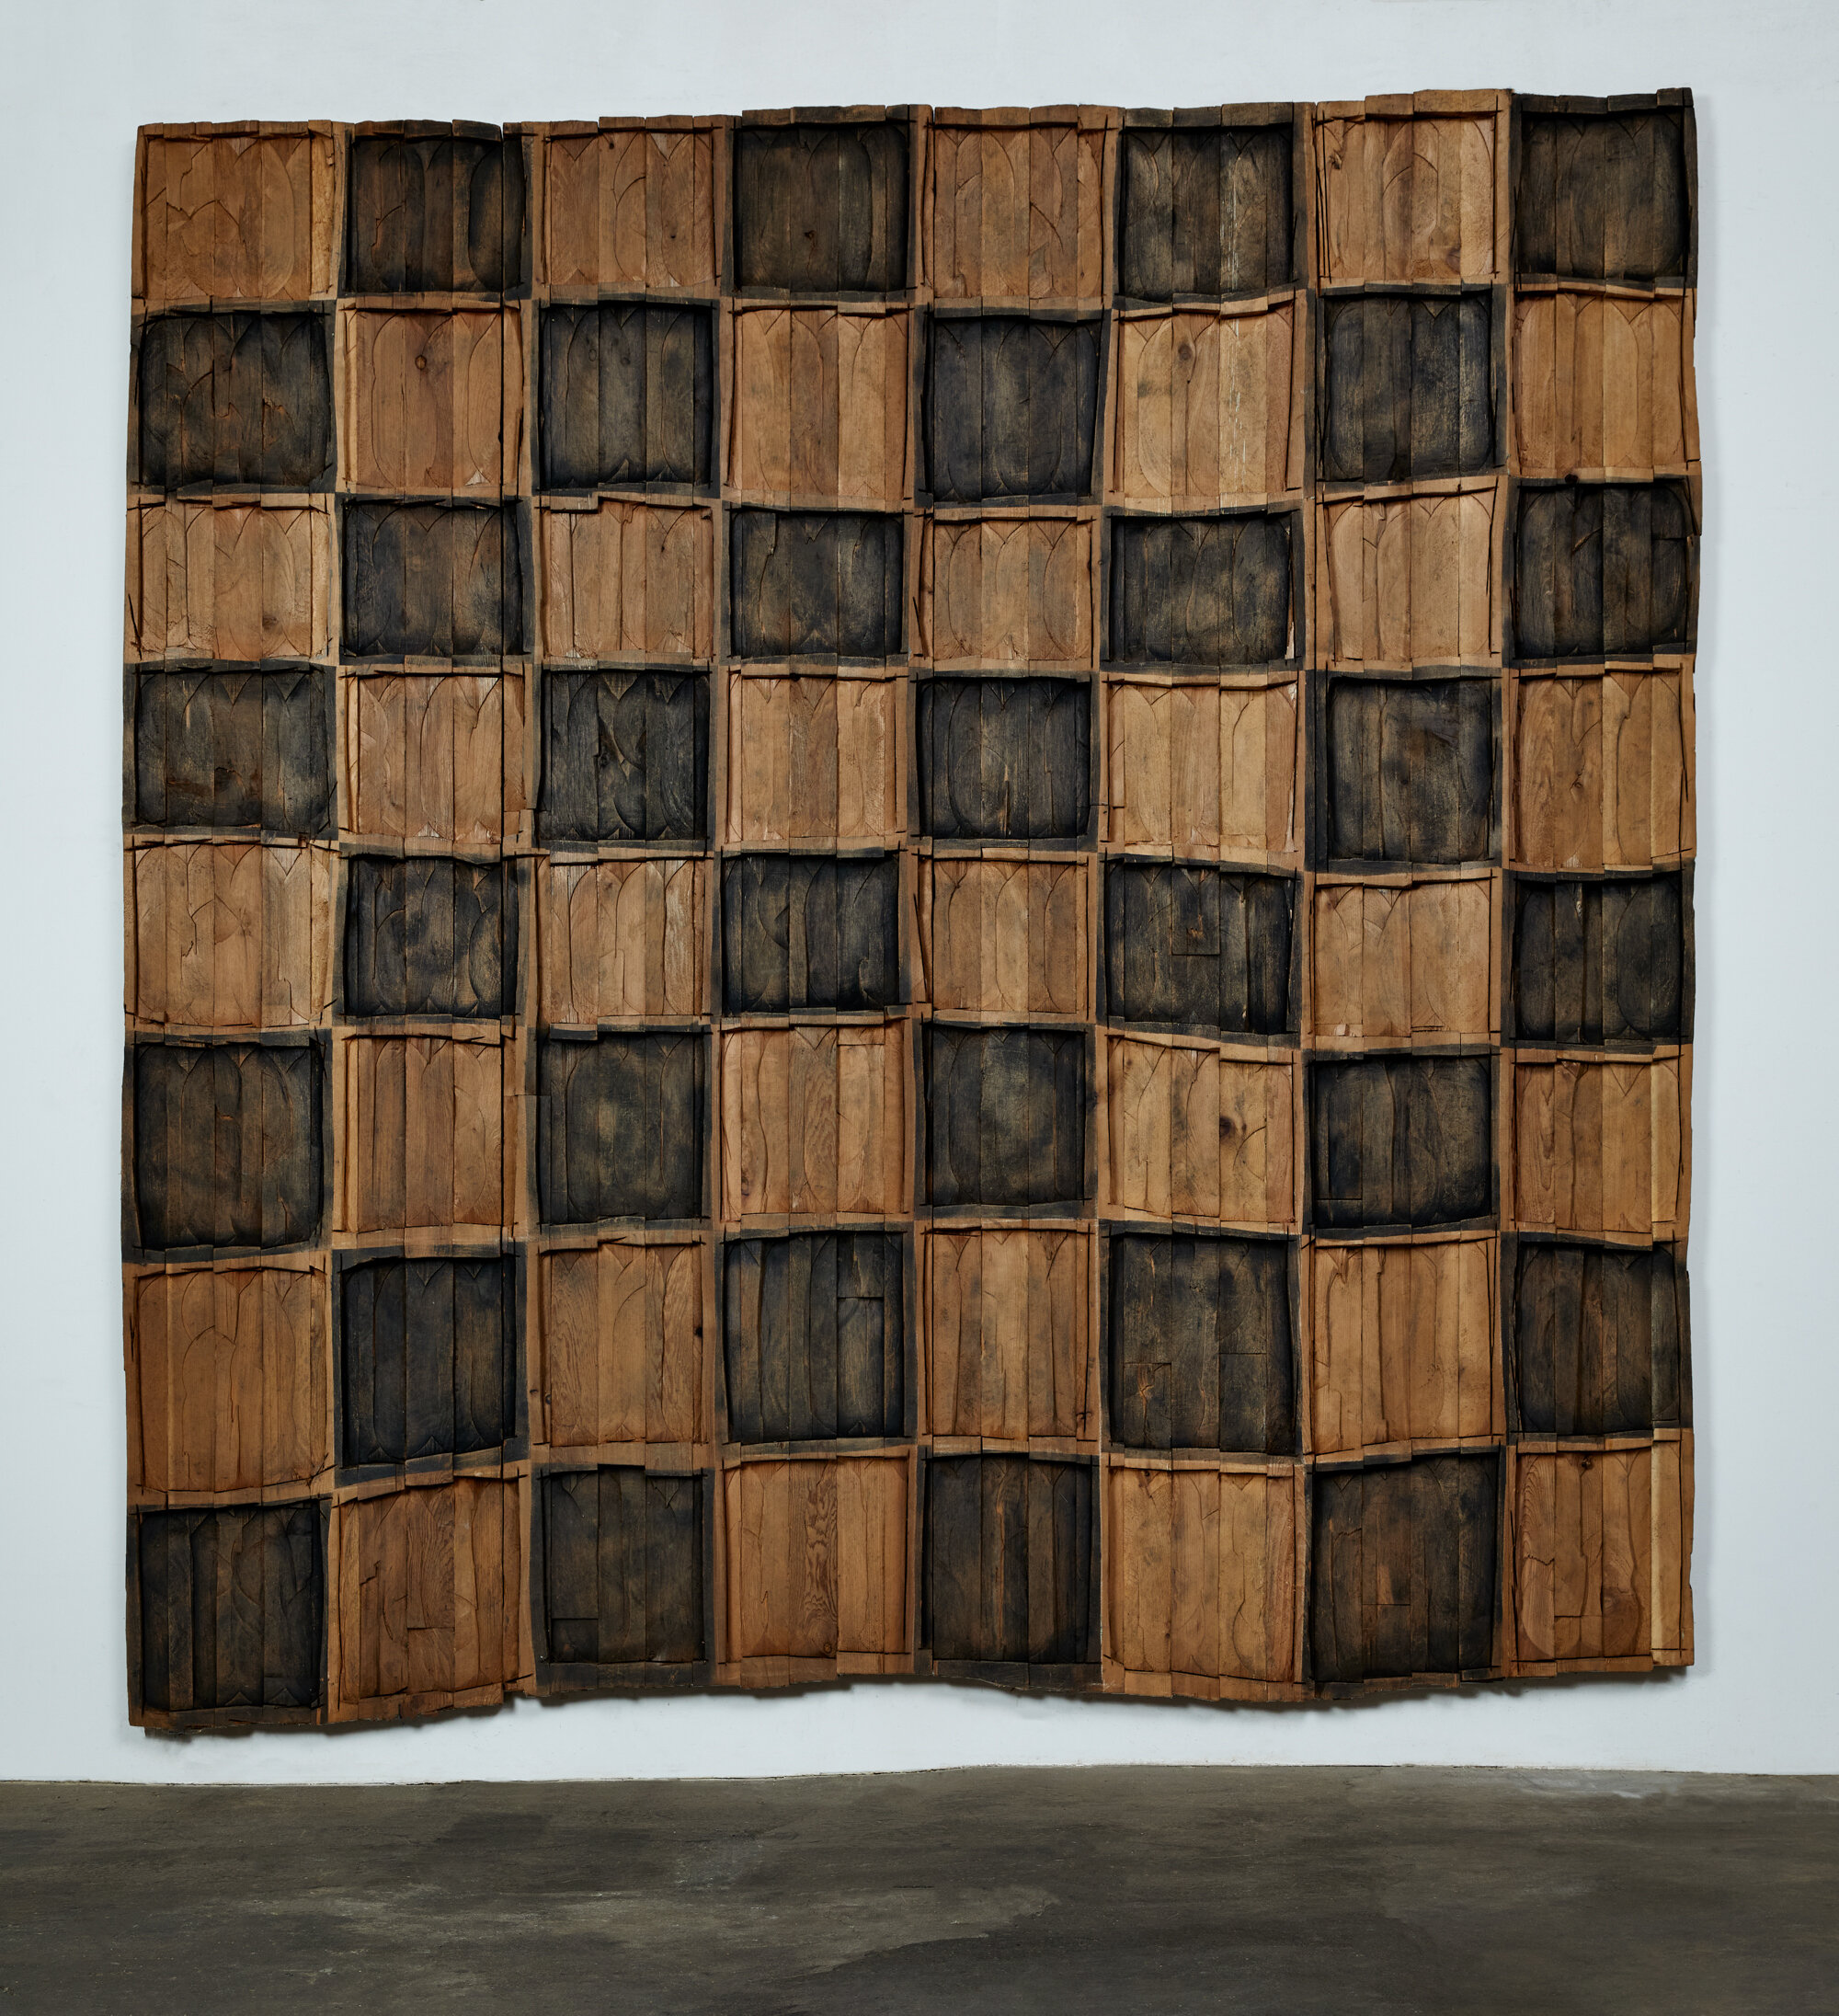   Floor Chessboard, 1995   cedar and graphite  117 x 114 x 1.5 in.    MORE IMAGES  